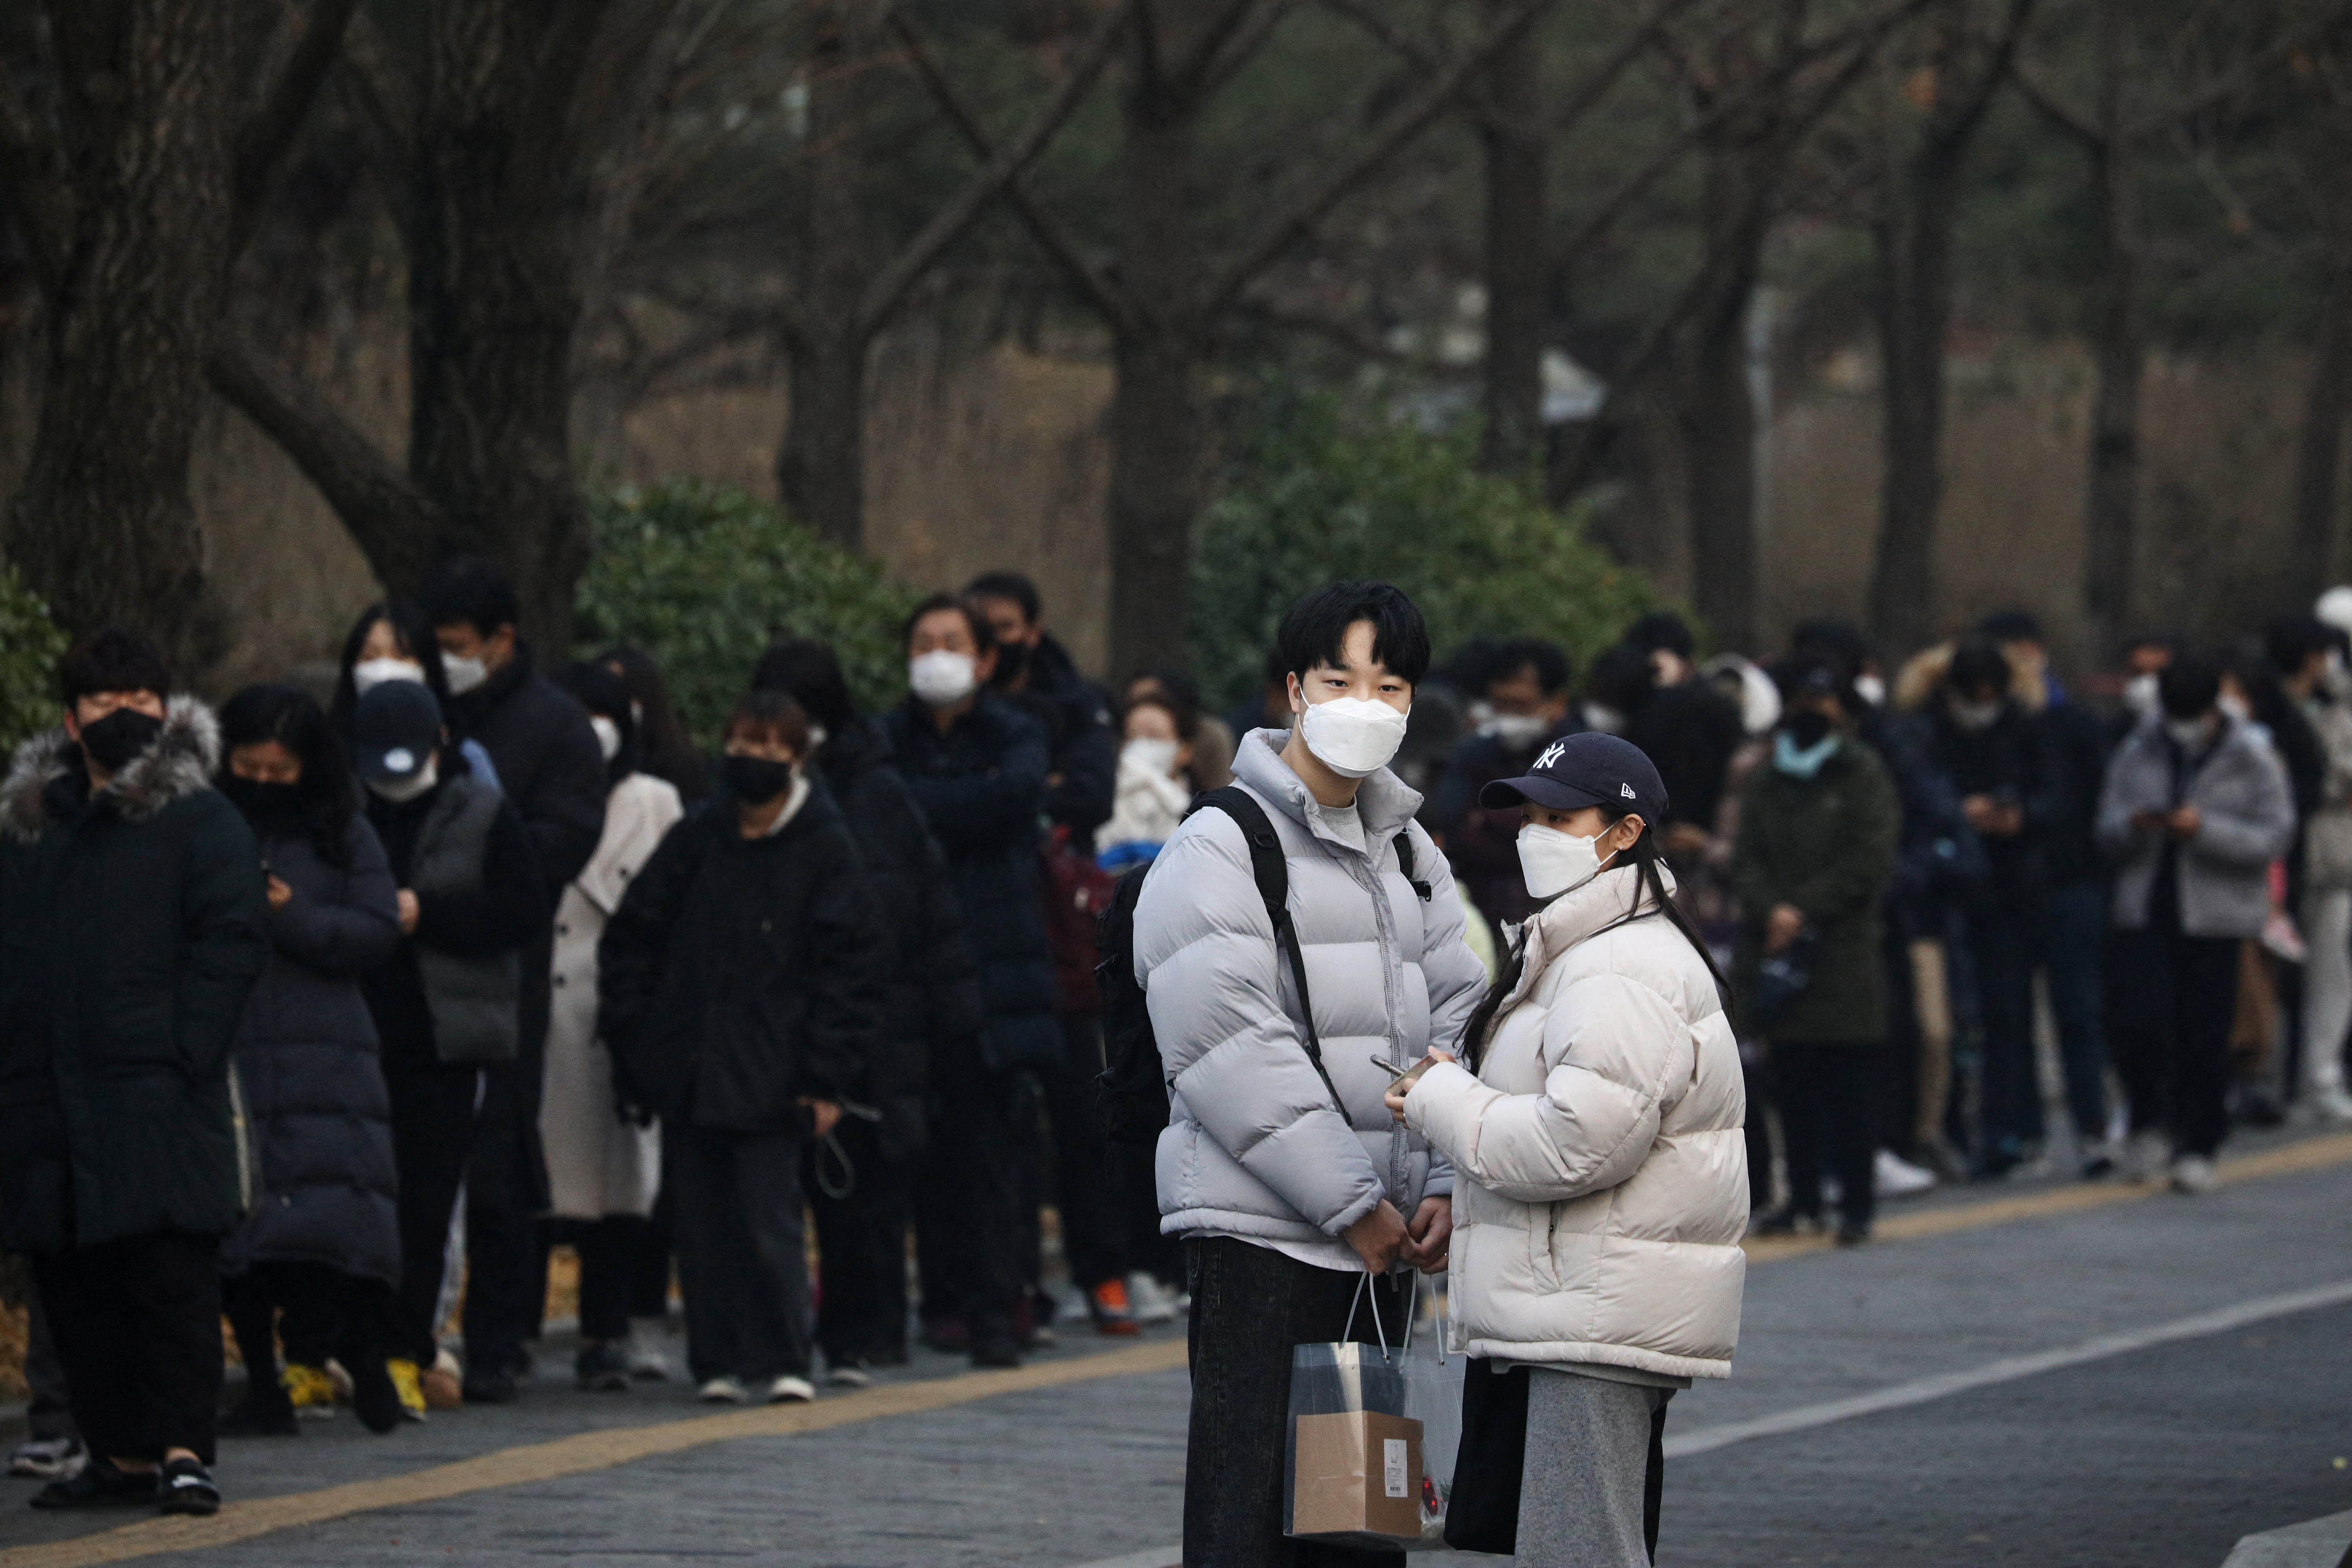 A couple stands next to people waiting in a long line to undergo coronavirus disease (COVID-19) test at a testing site in Seoul